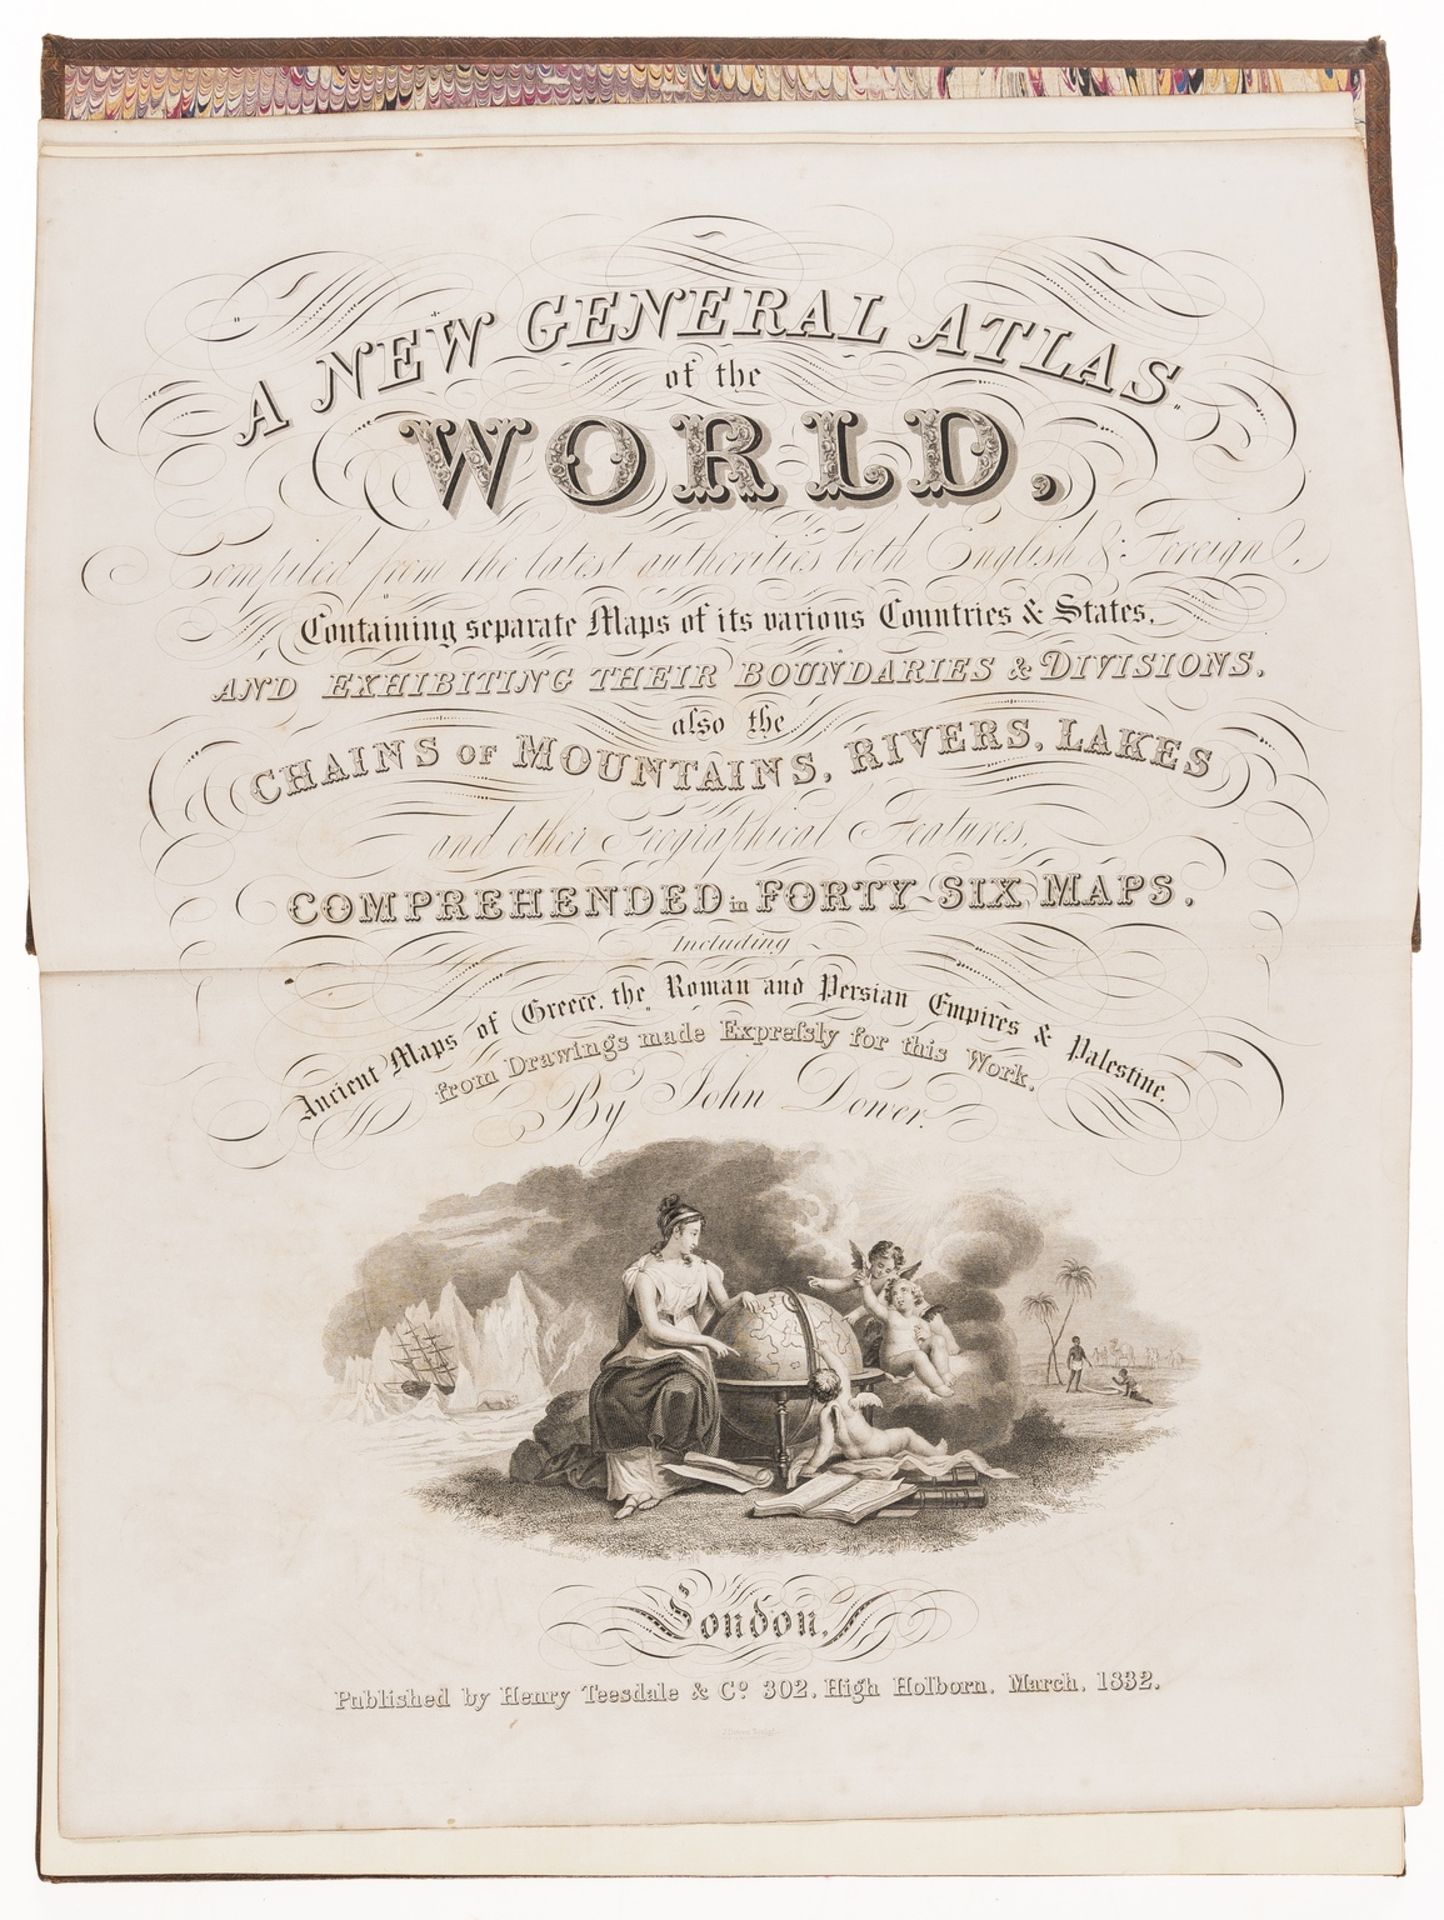 Atlases.- Teesdale (Henry, publisher) A New General Atlas of the World, handsomely bound, 1832. - Image 5 of 5